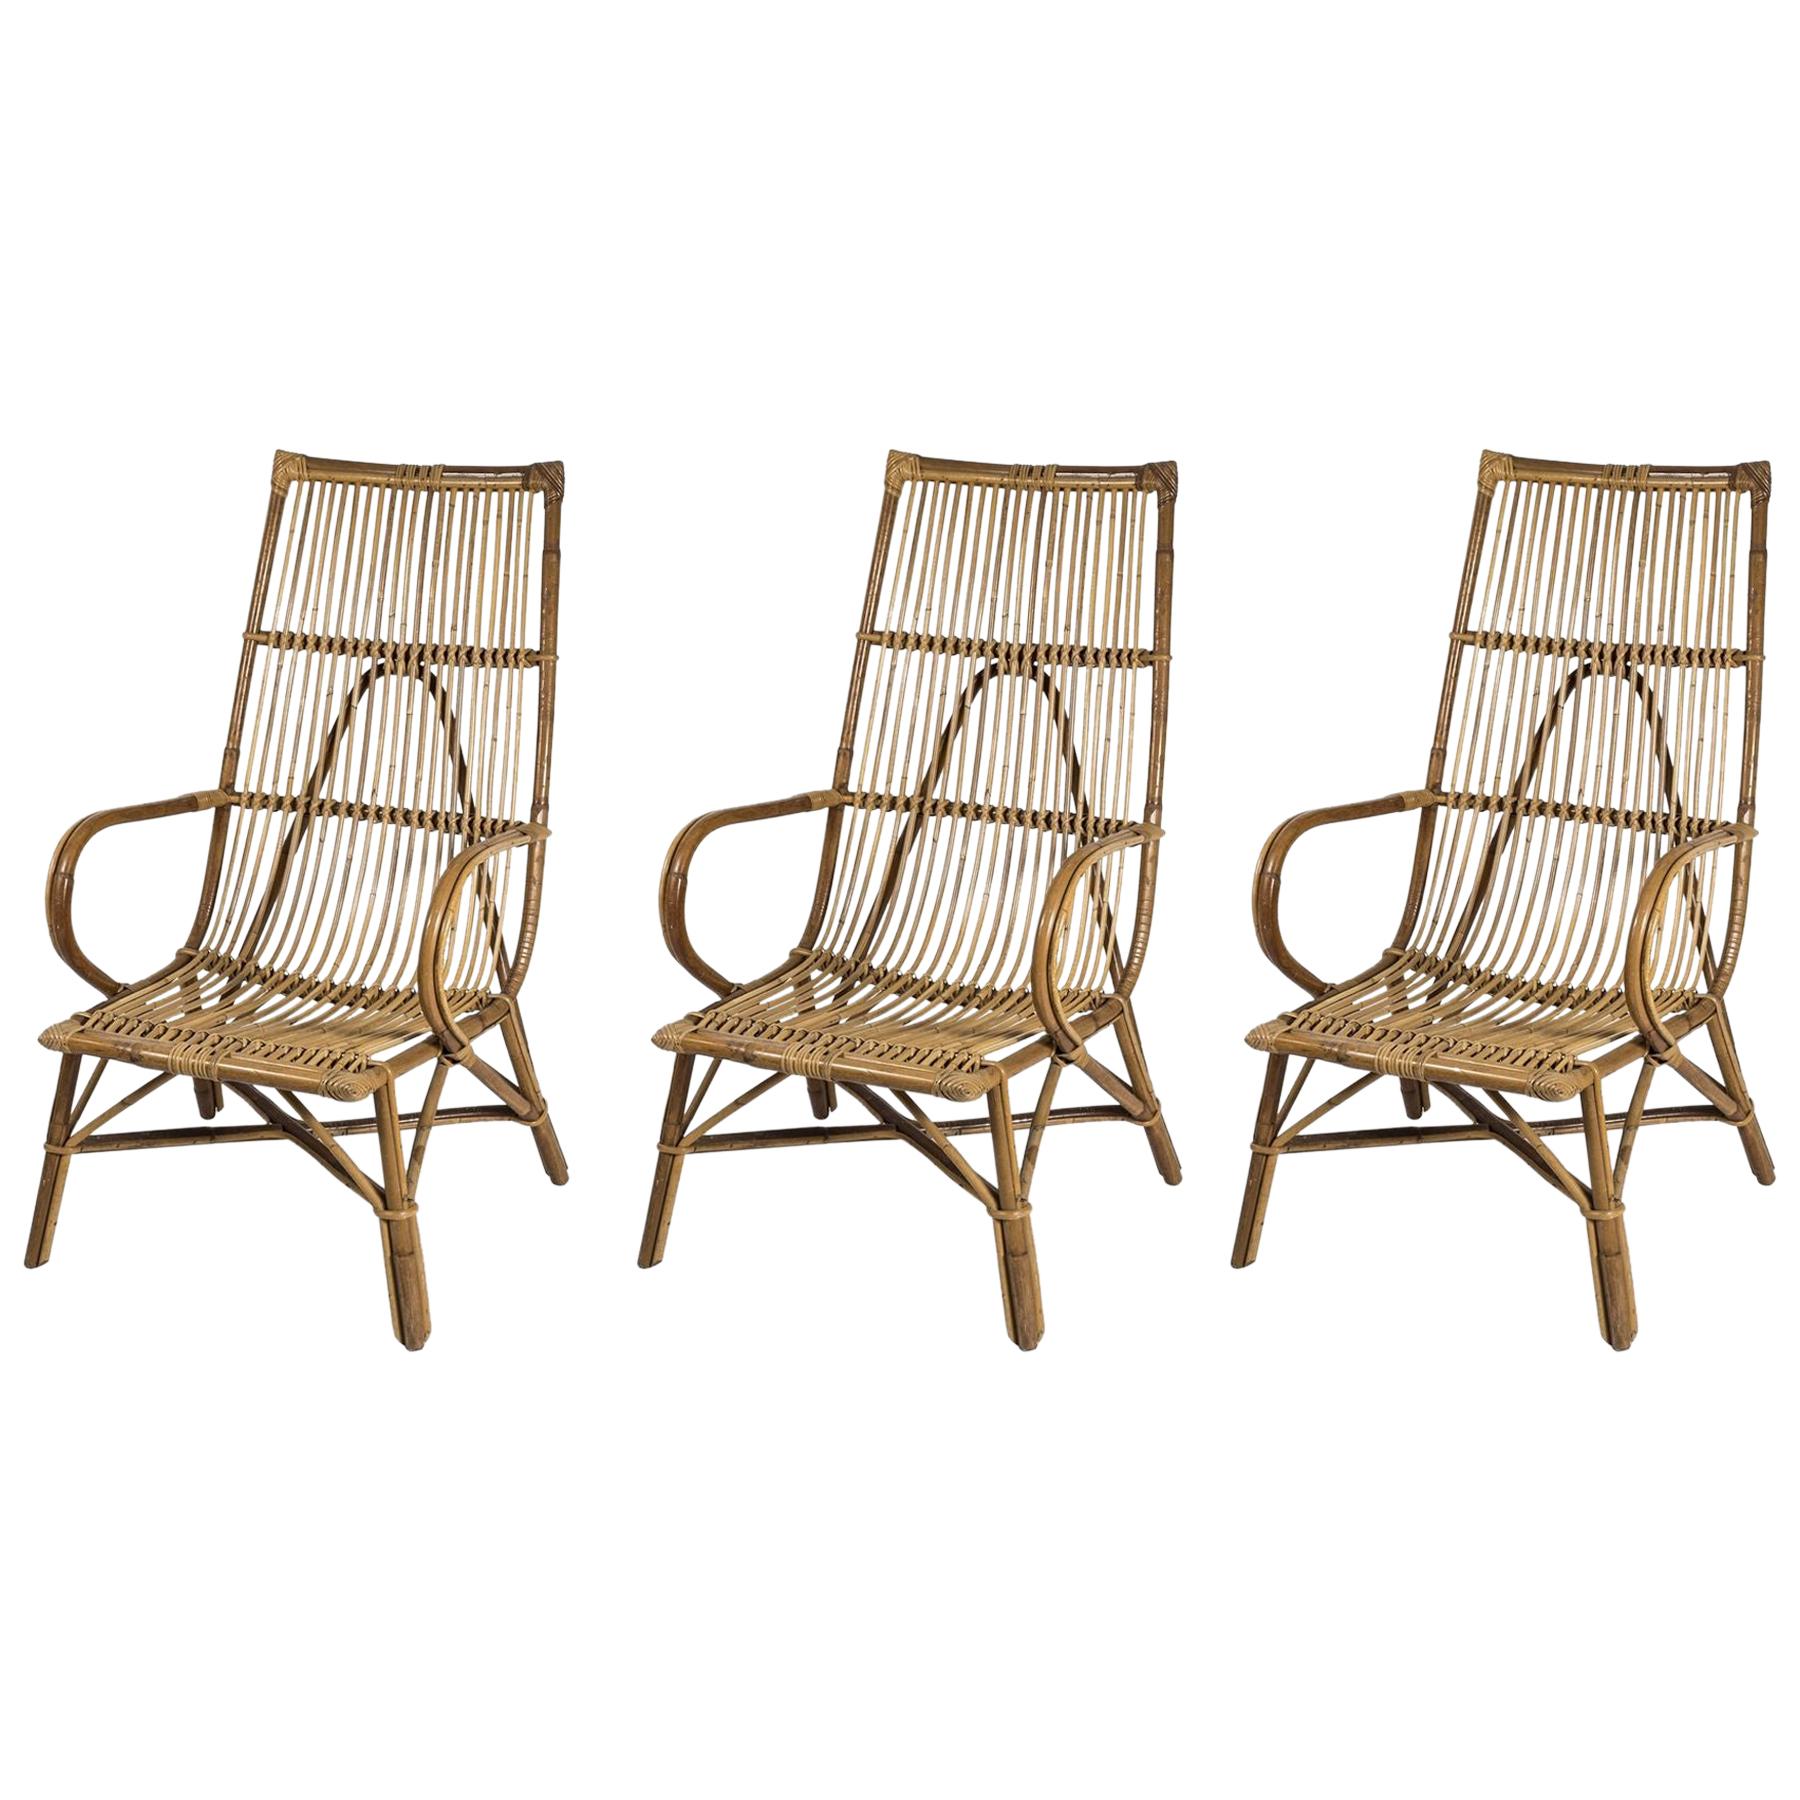 Set of Vintage Rattan Furniture Comprising Three Armchairs and Table, circa 1960